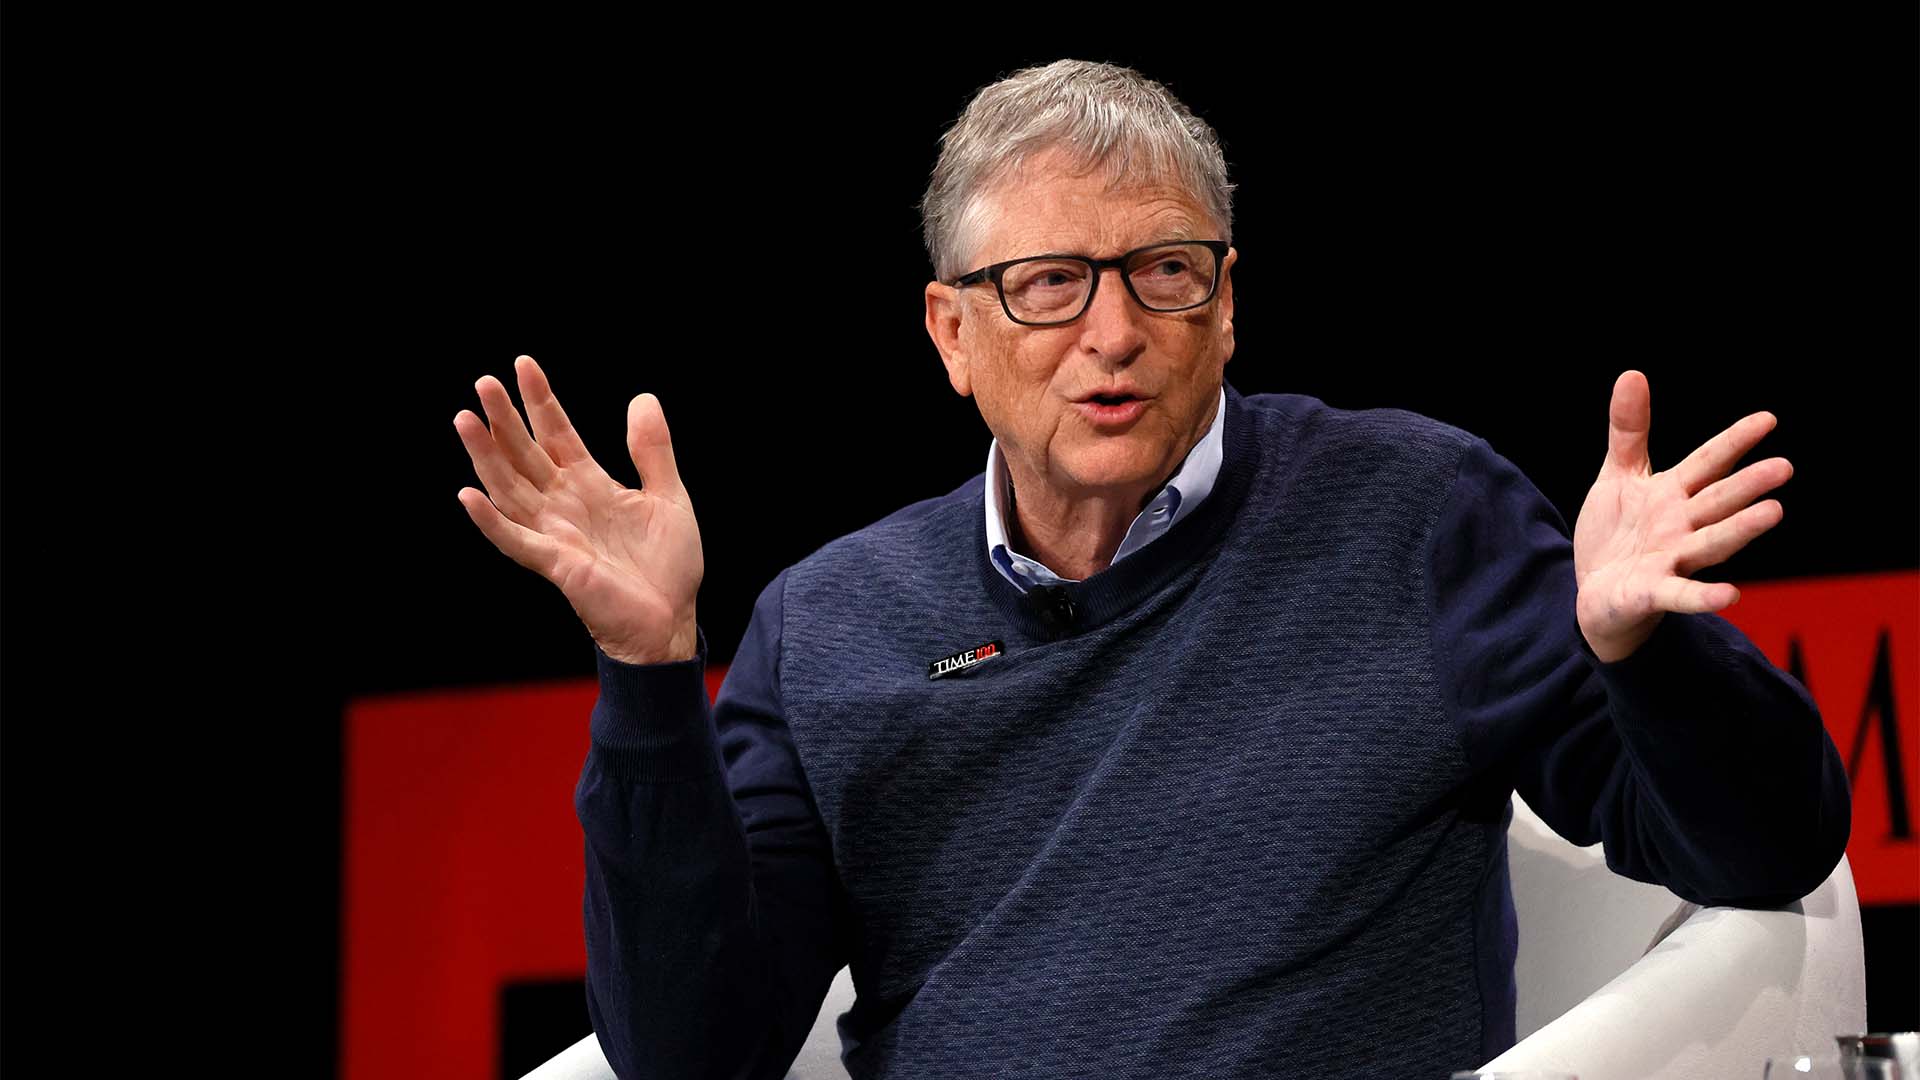 Bill Gates at the Time 100 Summit at Lincoln Center in New York City.